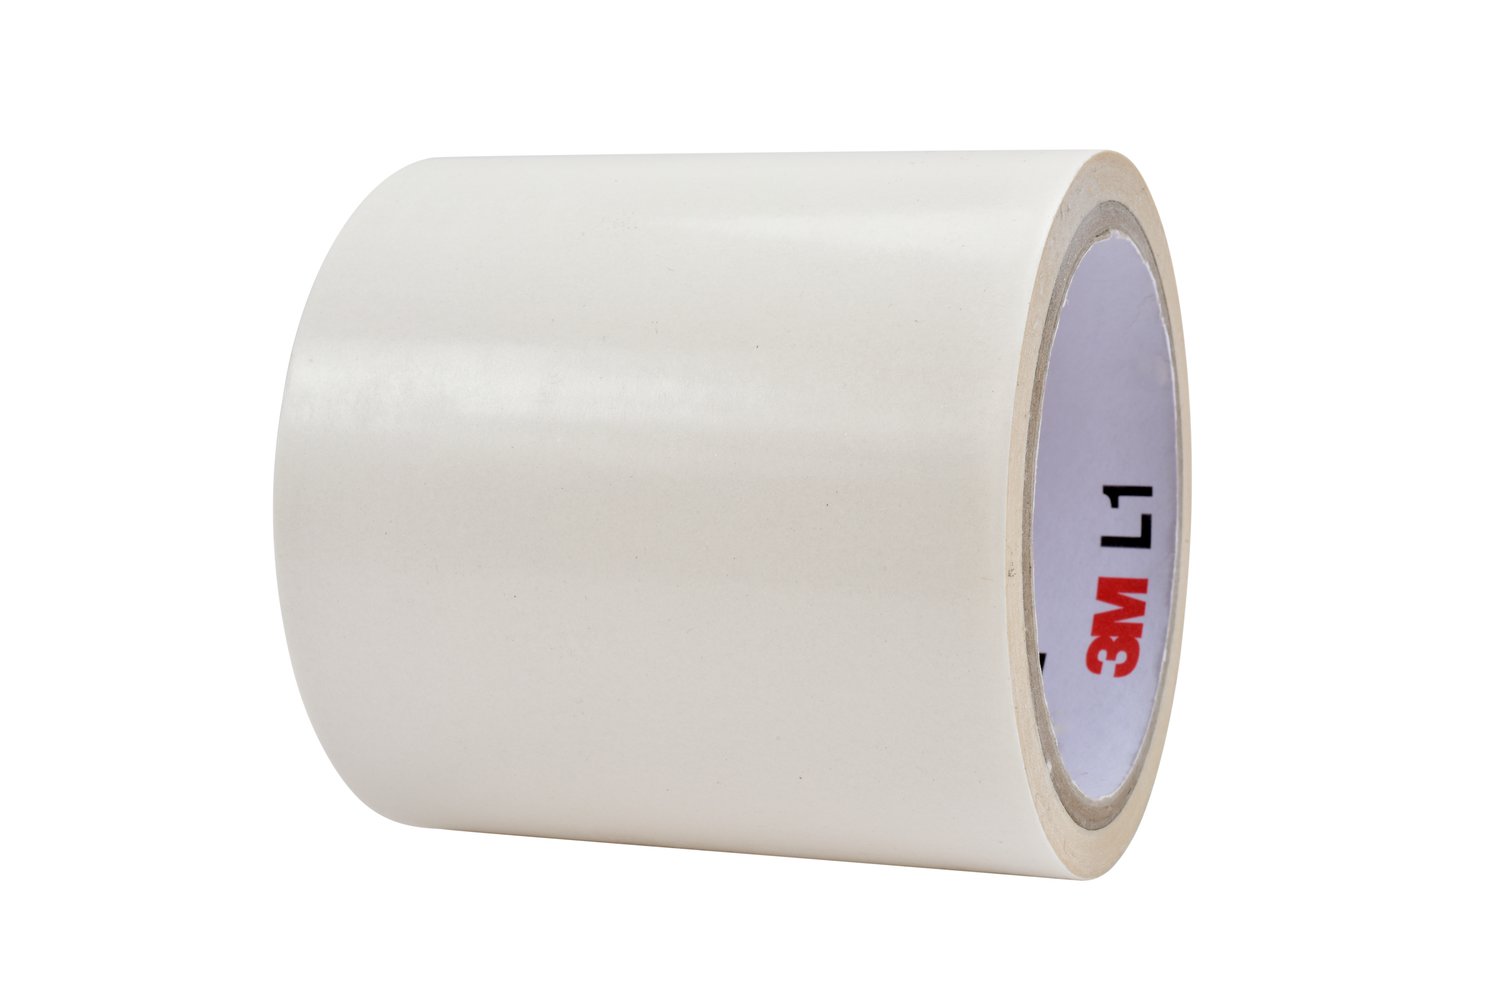 7100089835 - 3M Double Coated Adhesive Tape L1+DCP, Clear, 1524 mm x 230 m, 0.09 mm,
6 rolls per pallet